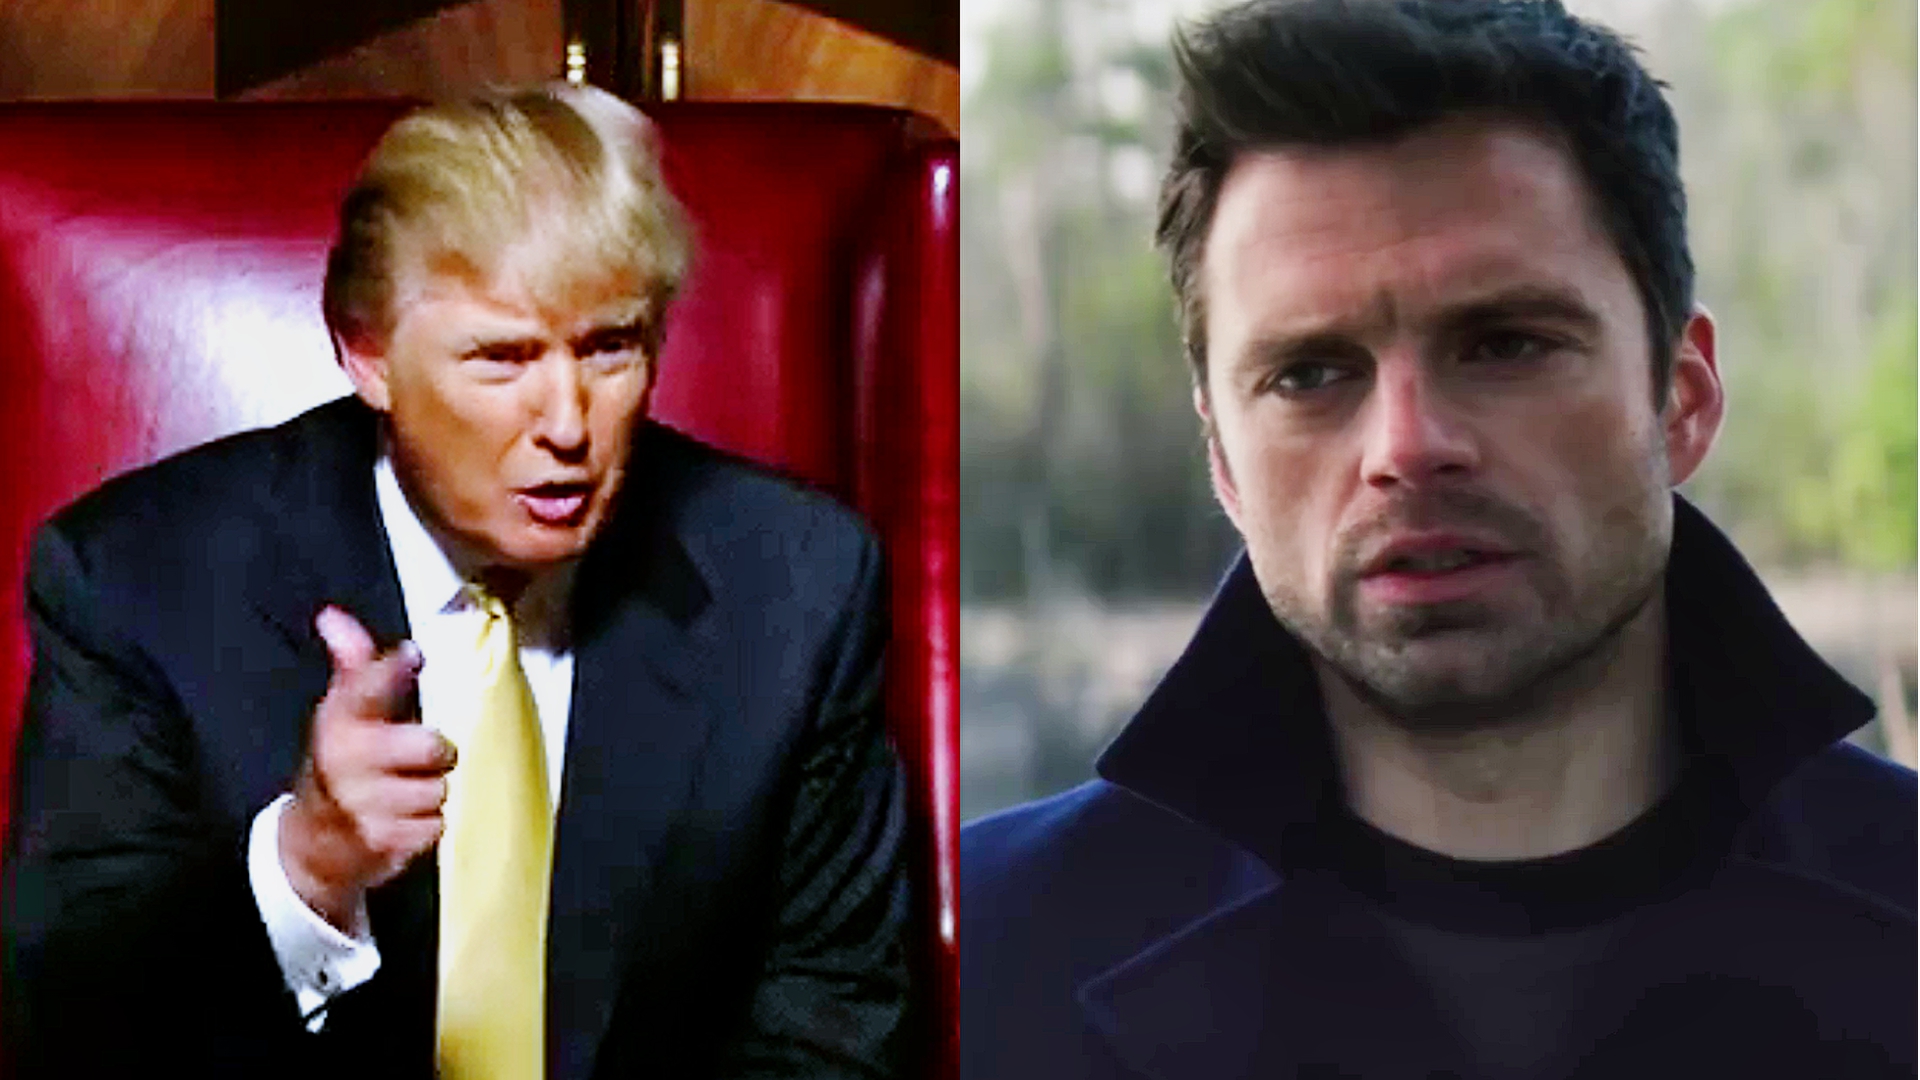 This Happened: Trump Will Be Played By Marvel Superhero Actor Sebastian Stan In ‘Apprentice’ Movie